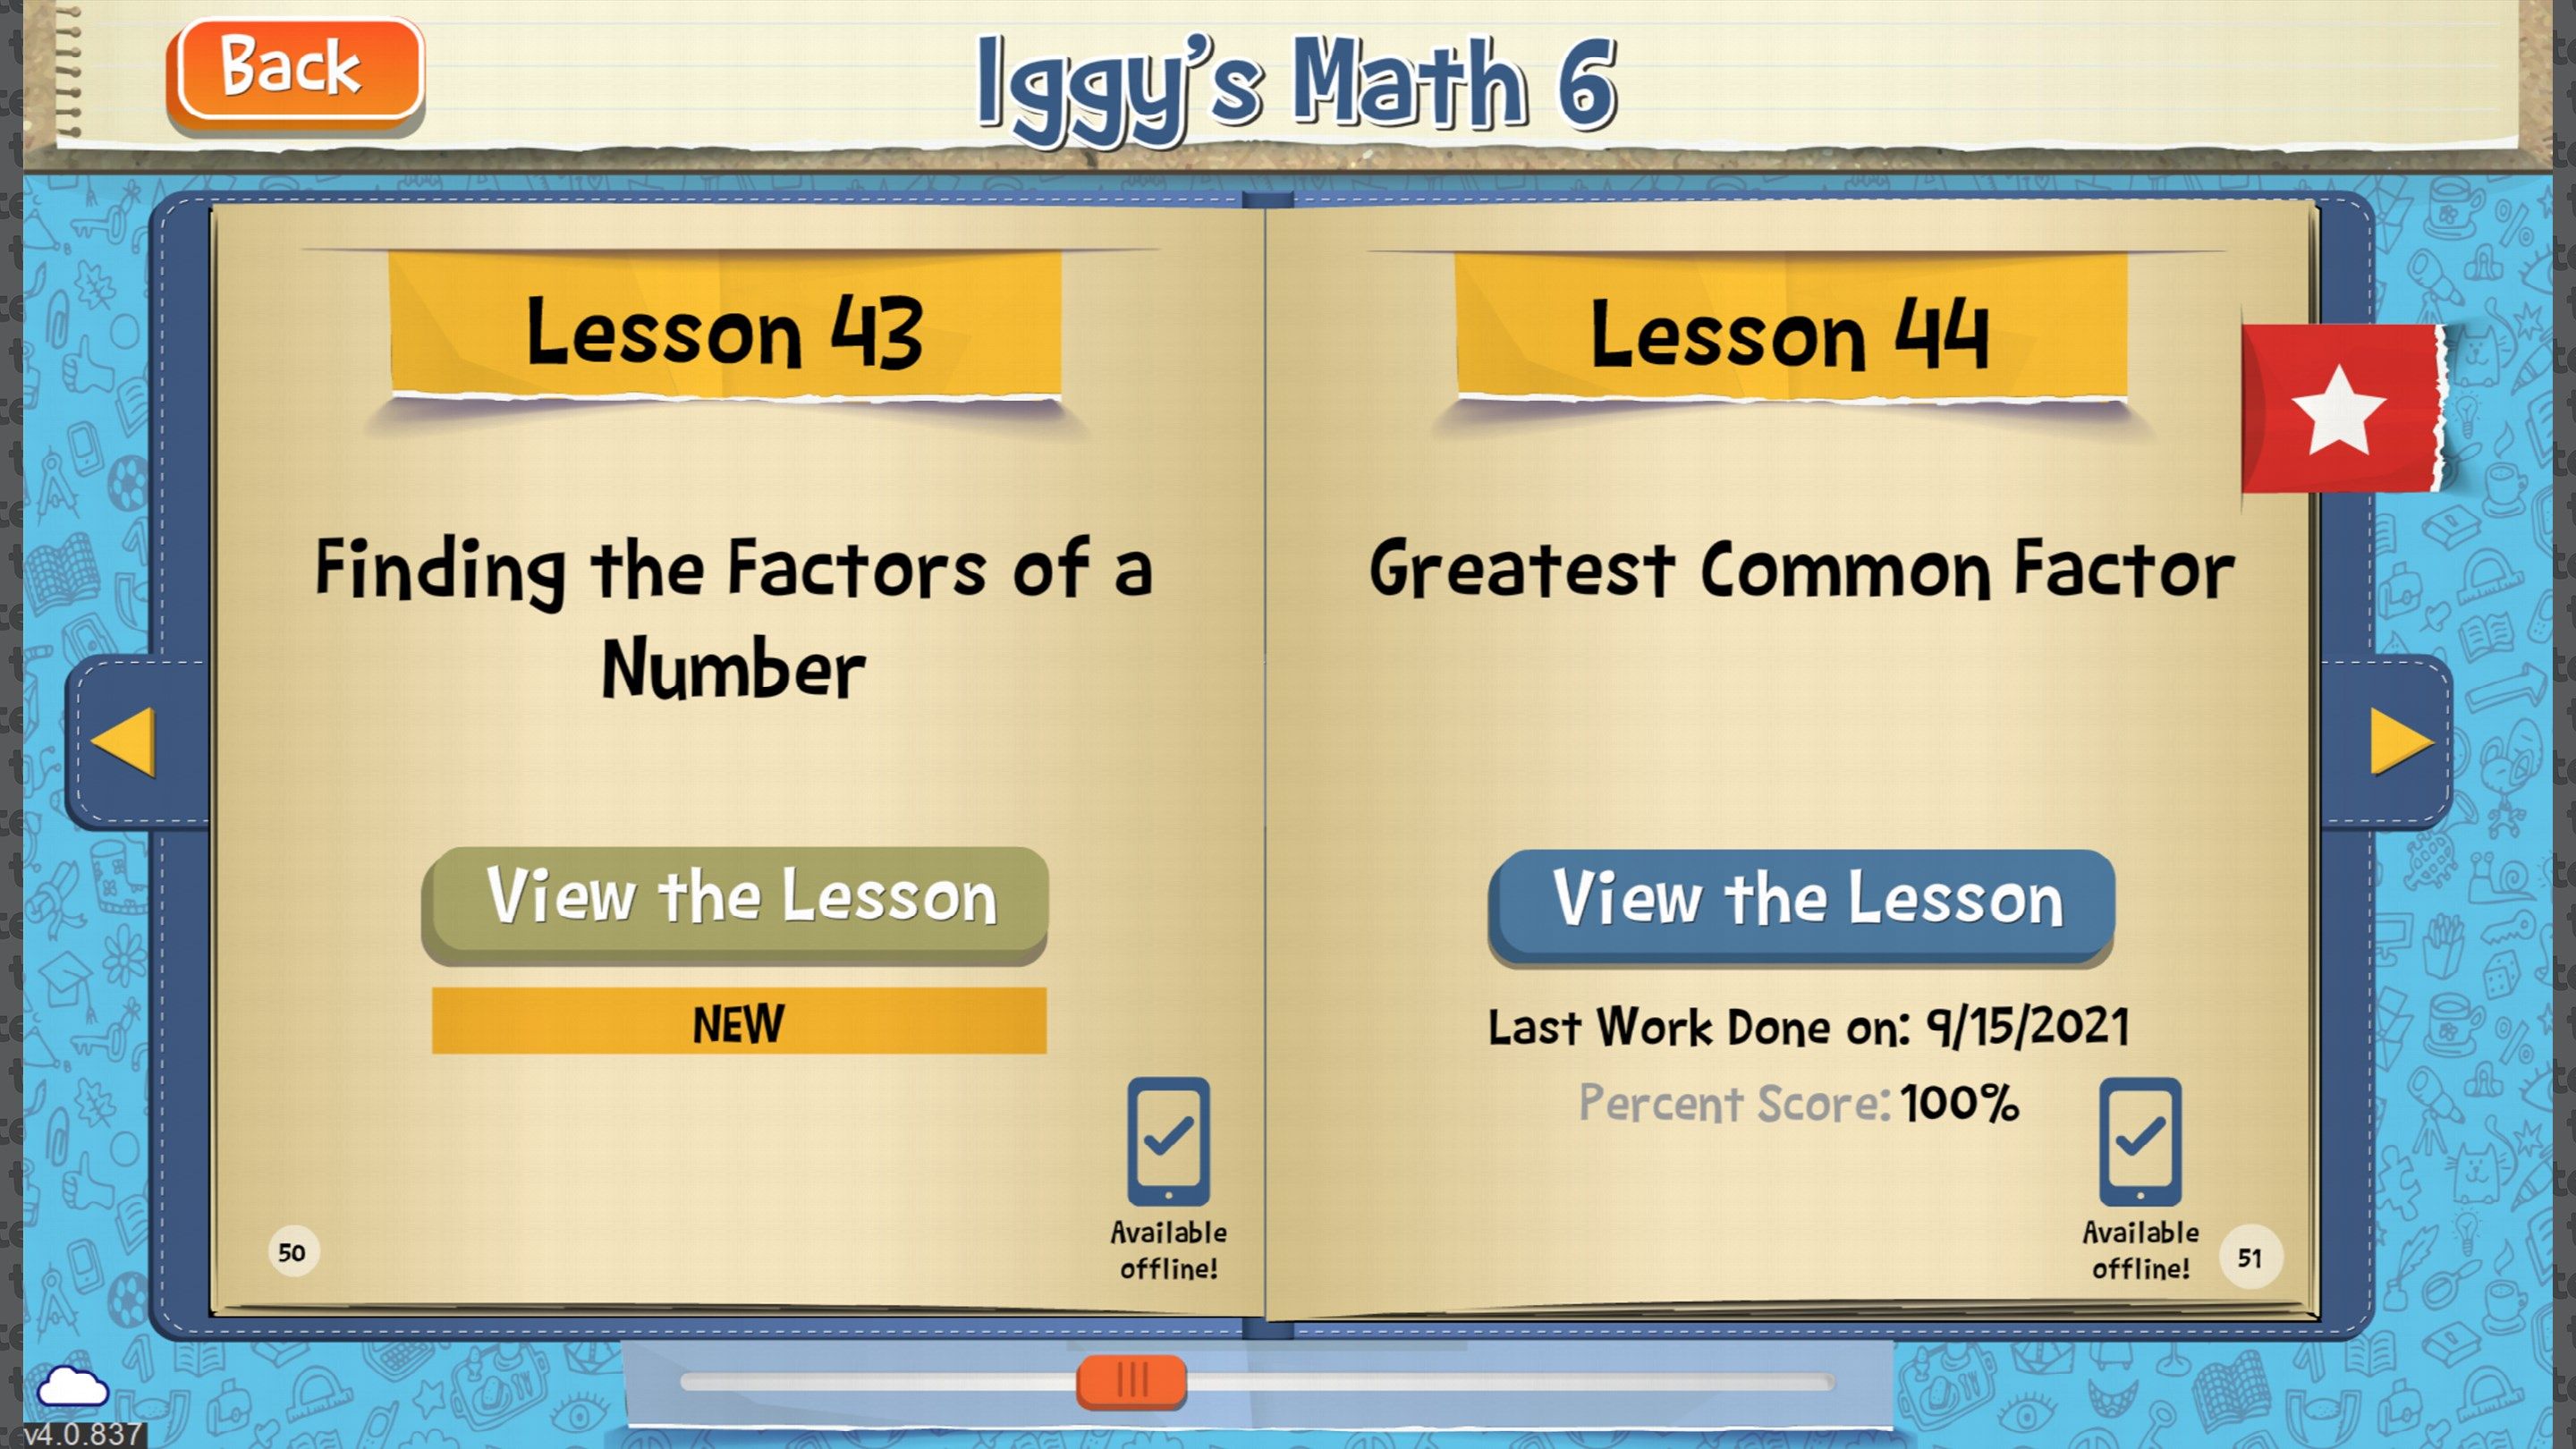 Each lesson covers a core concept with a lecture, and a set of problems to solve.